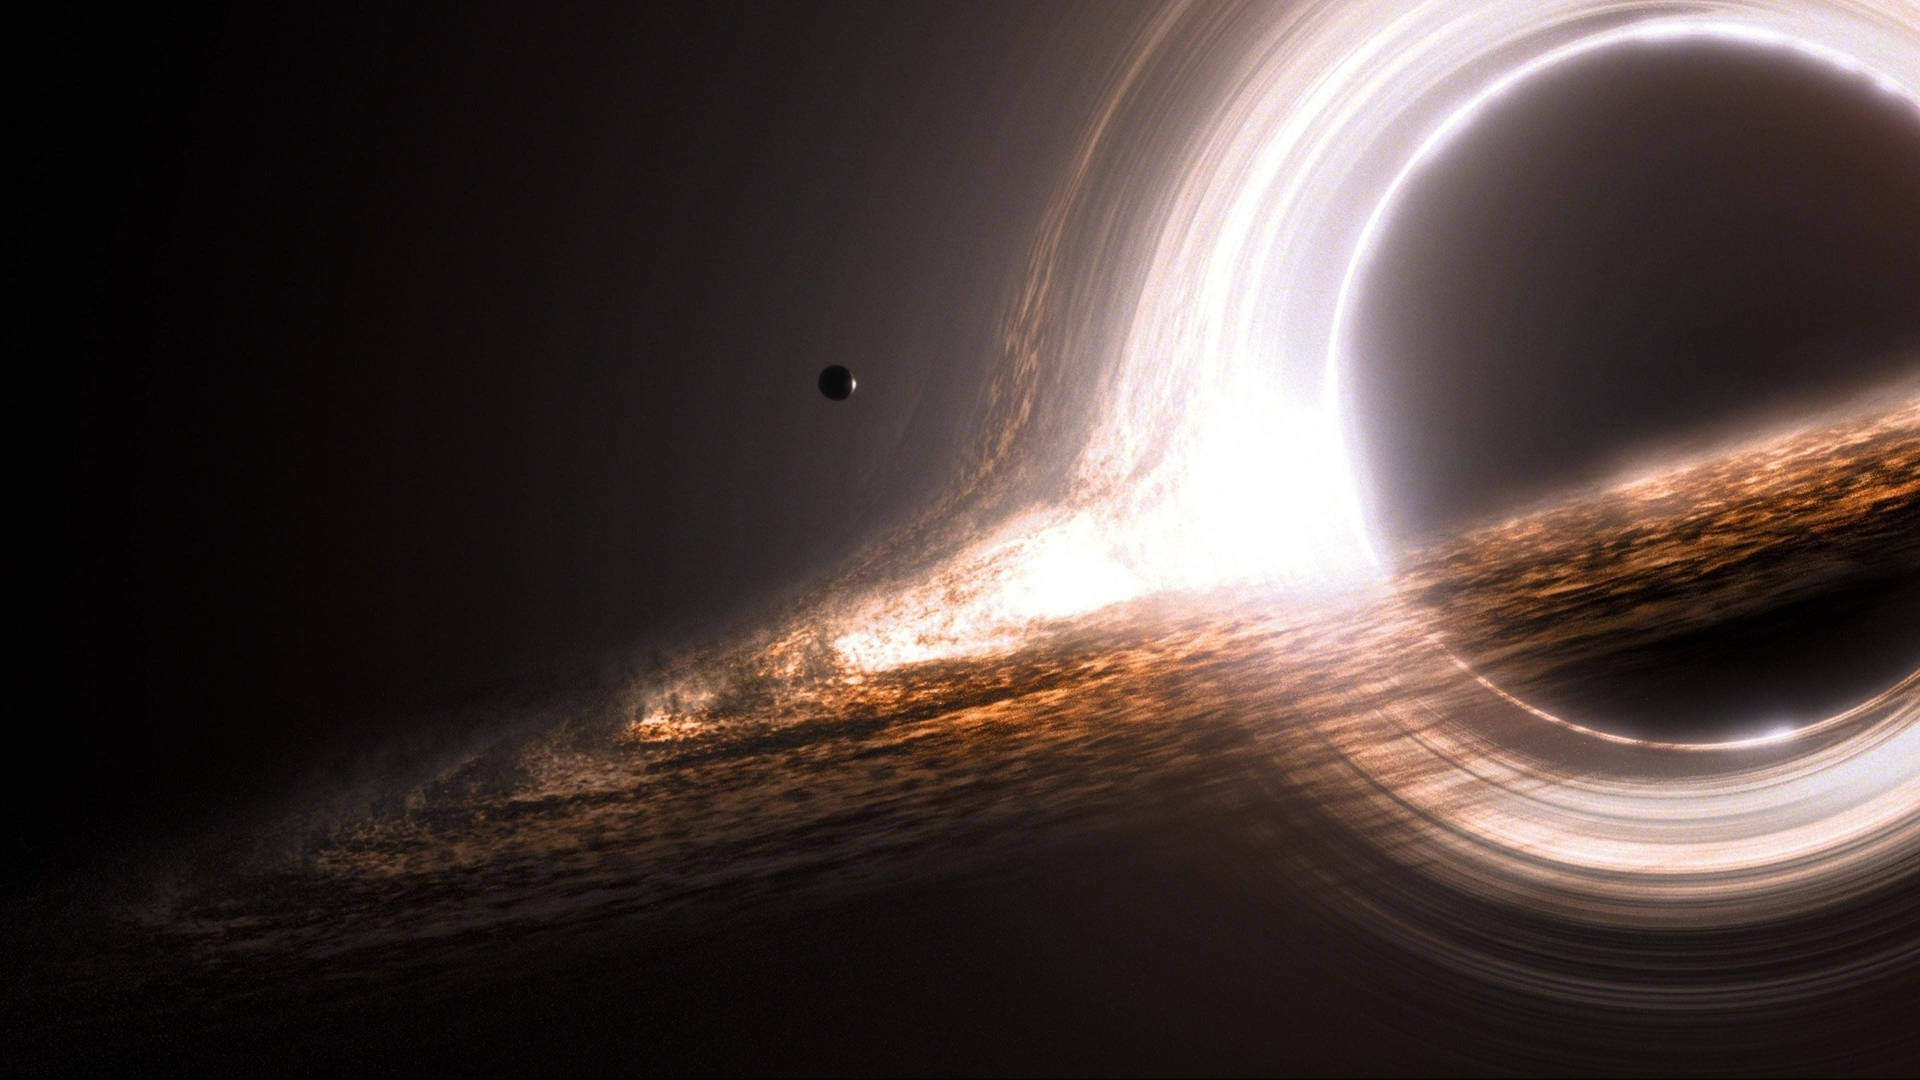 Super Massive Black Hole With Ring Wallpaper